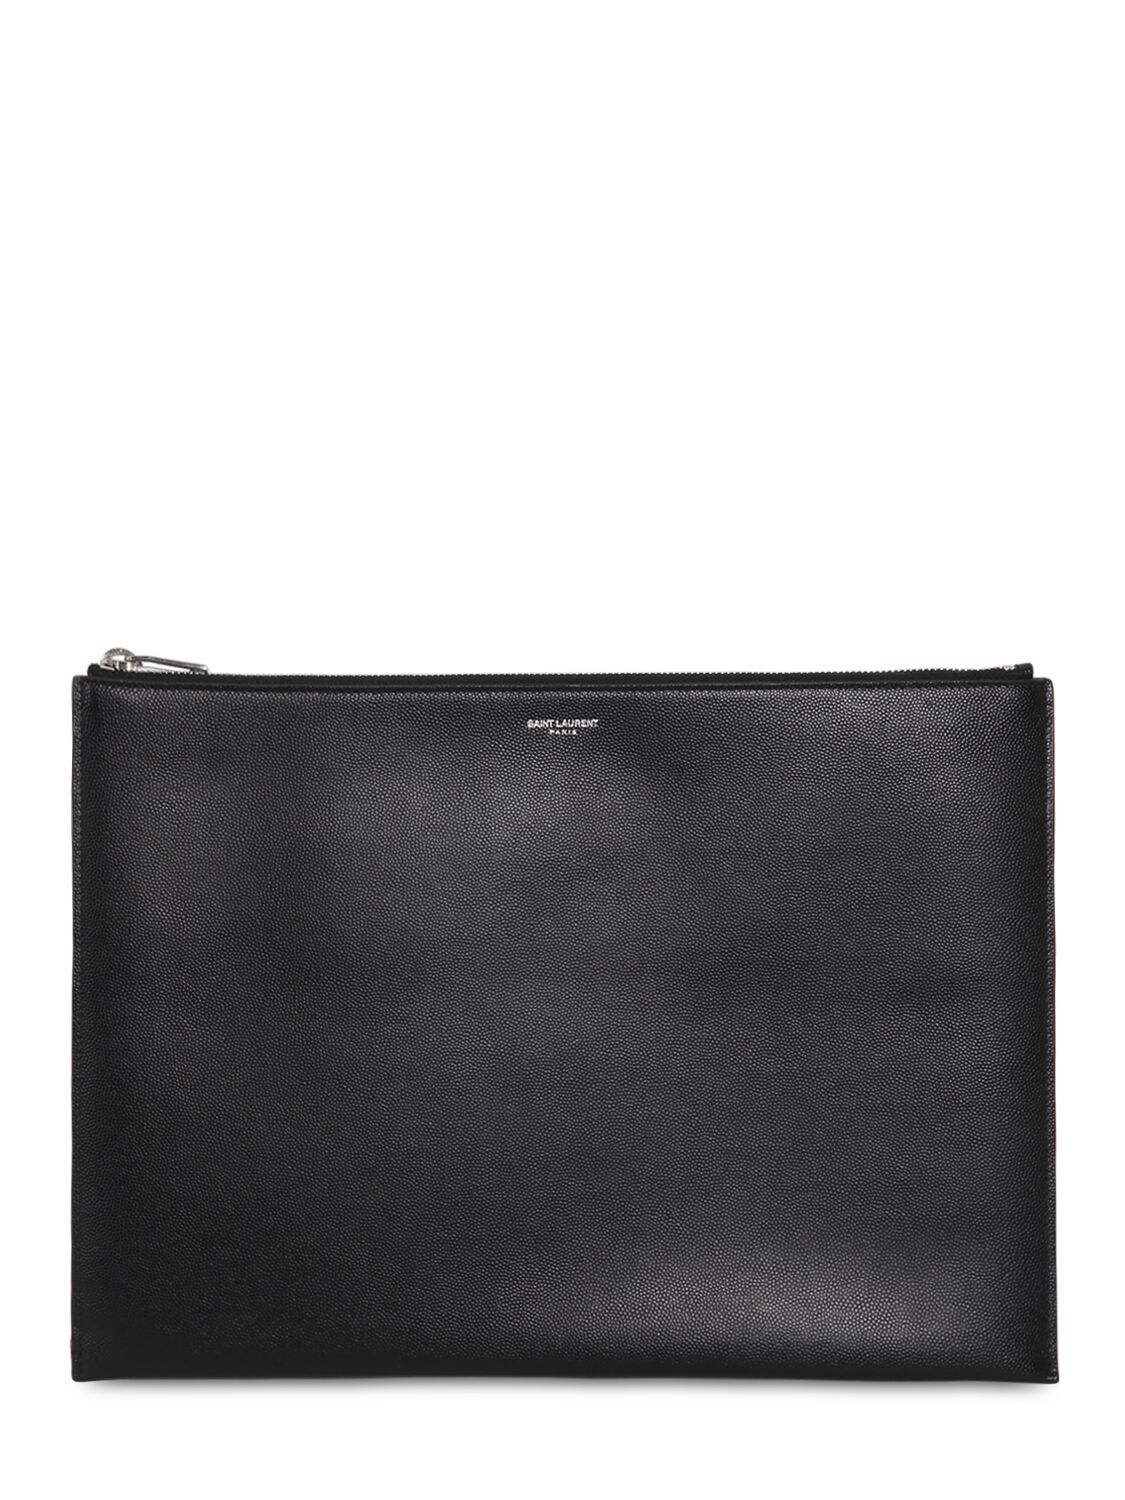 Saint Laurent Grained Leather Zipped A4 Pouch In Black